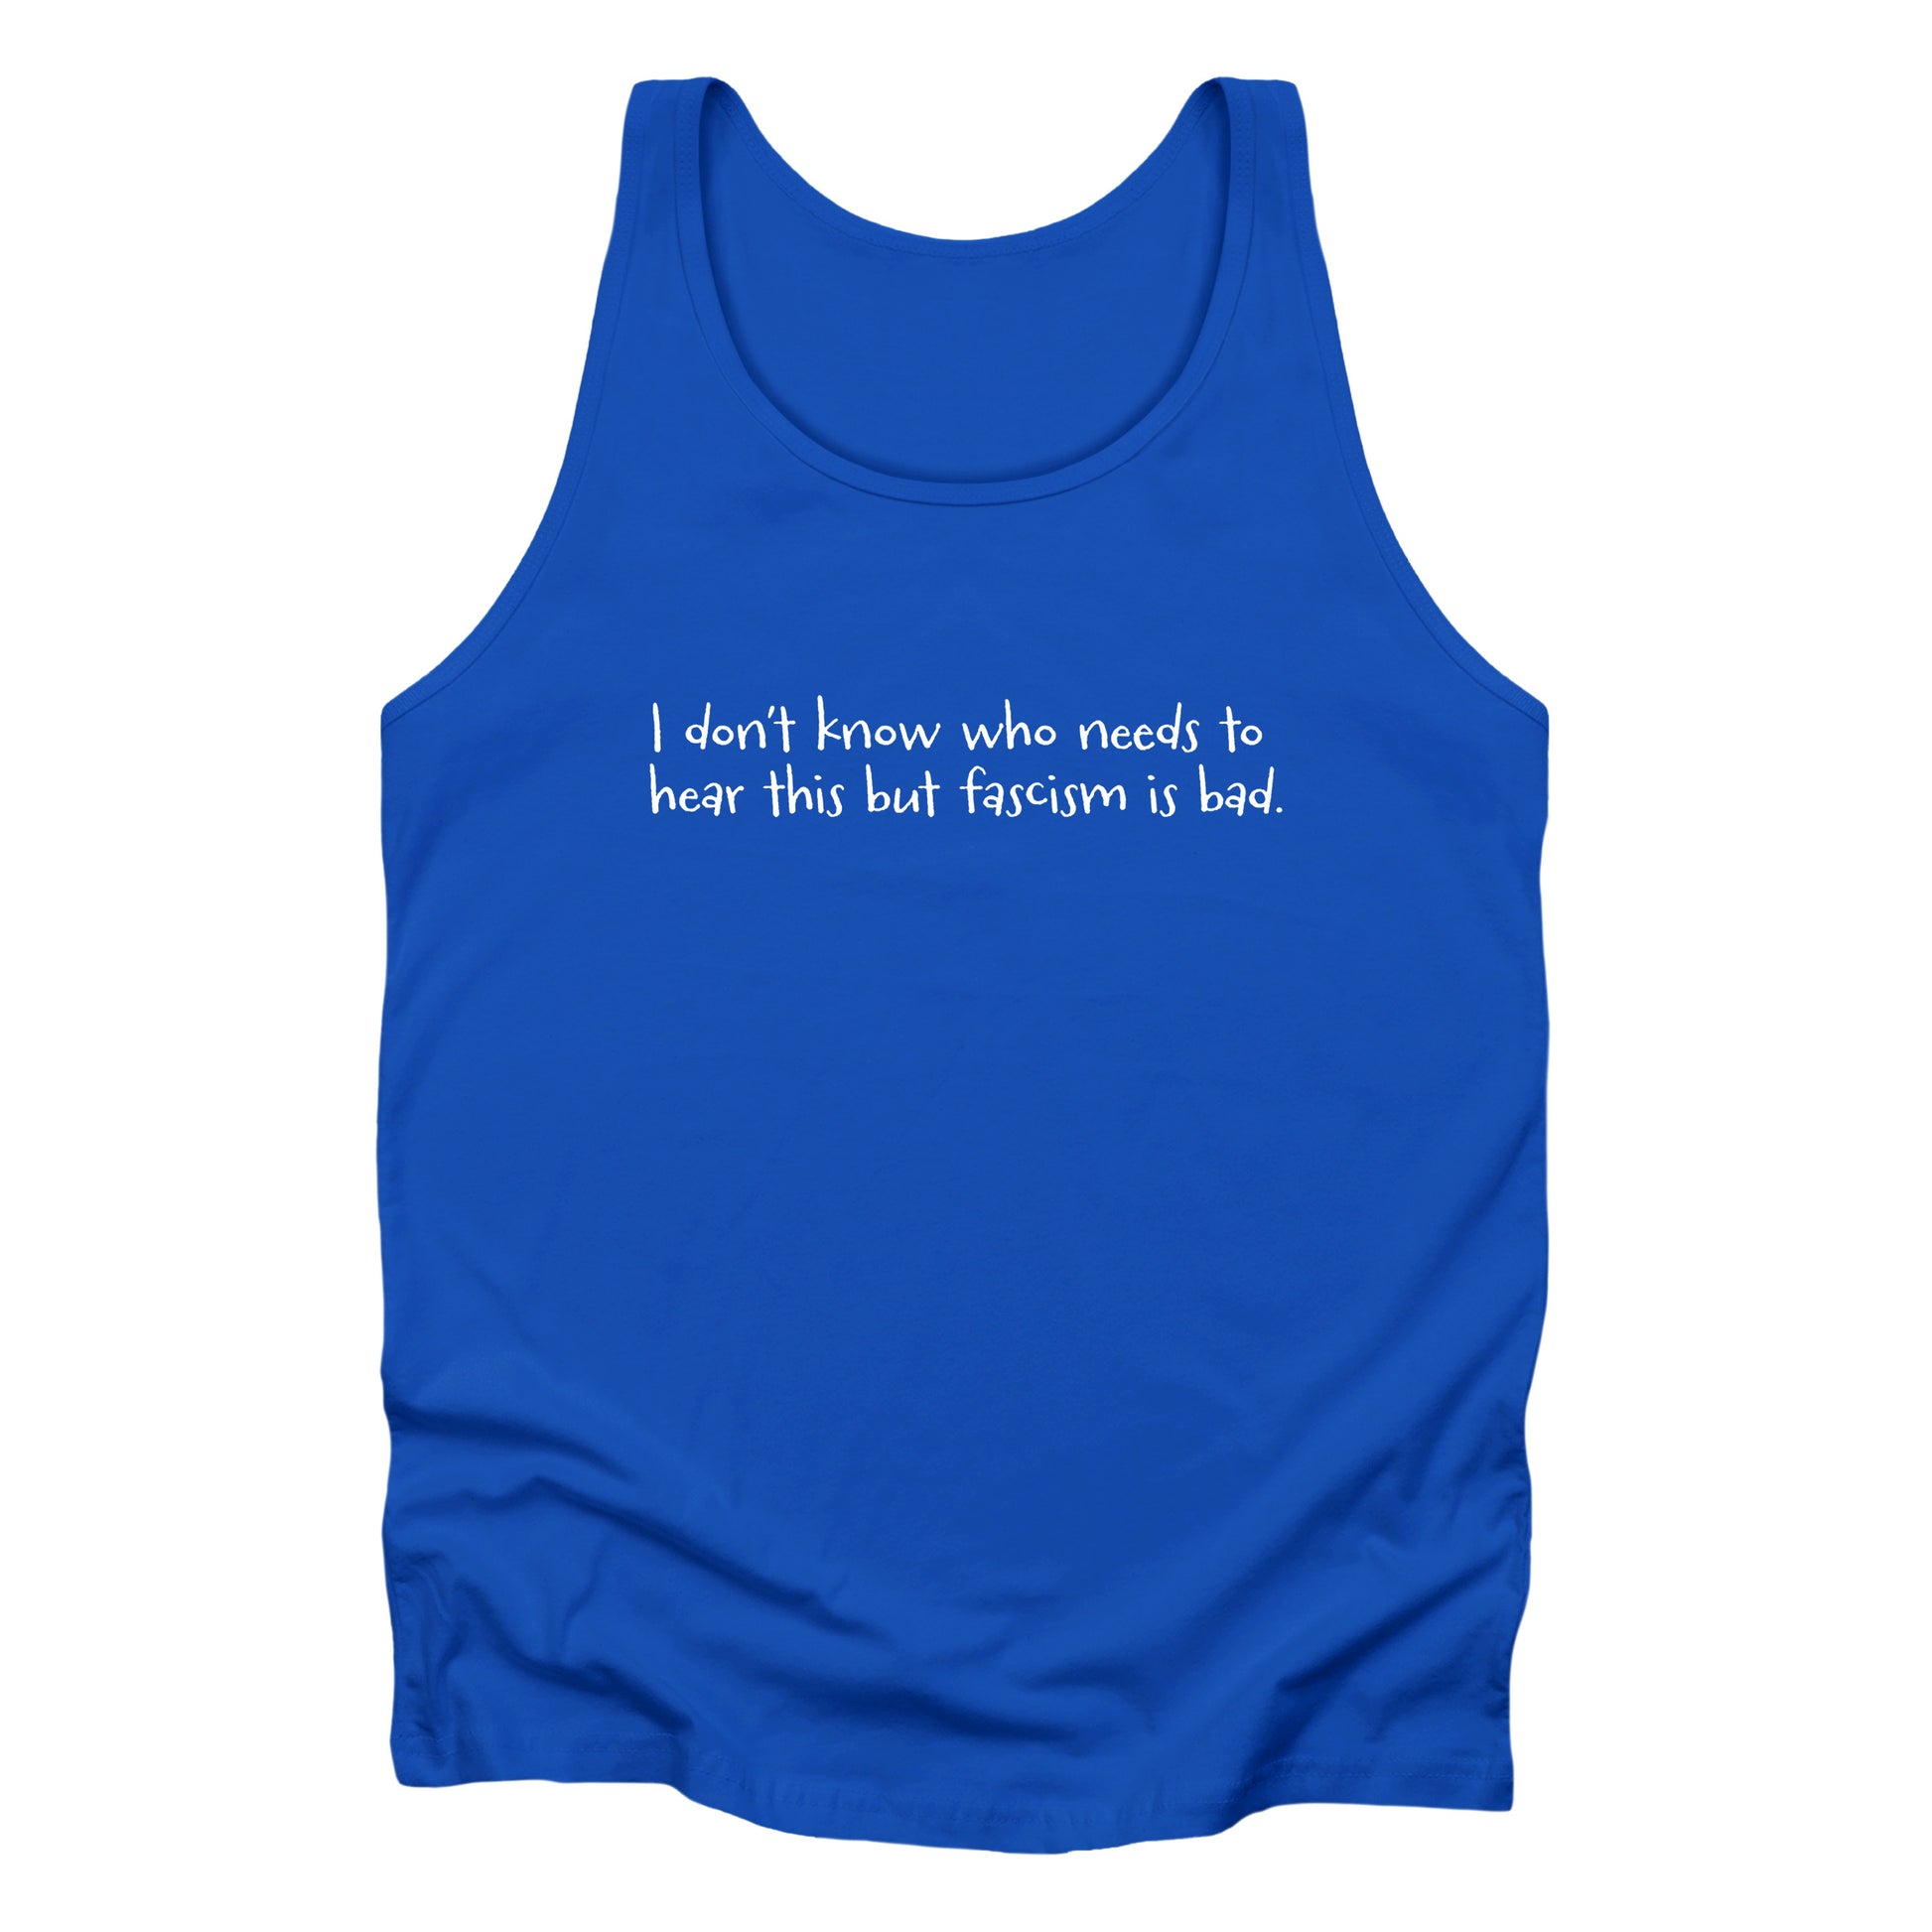 True Royal unisex tank top that reads in a hand-written font, “I don’t know who needs to hear this but fascism is bad.” It takes up two lines.